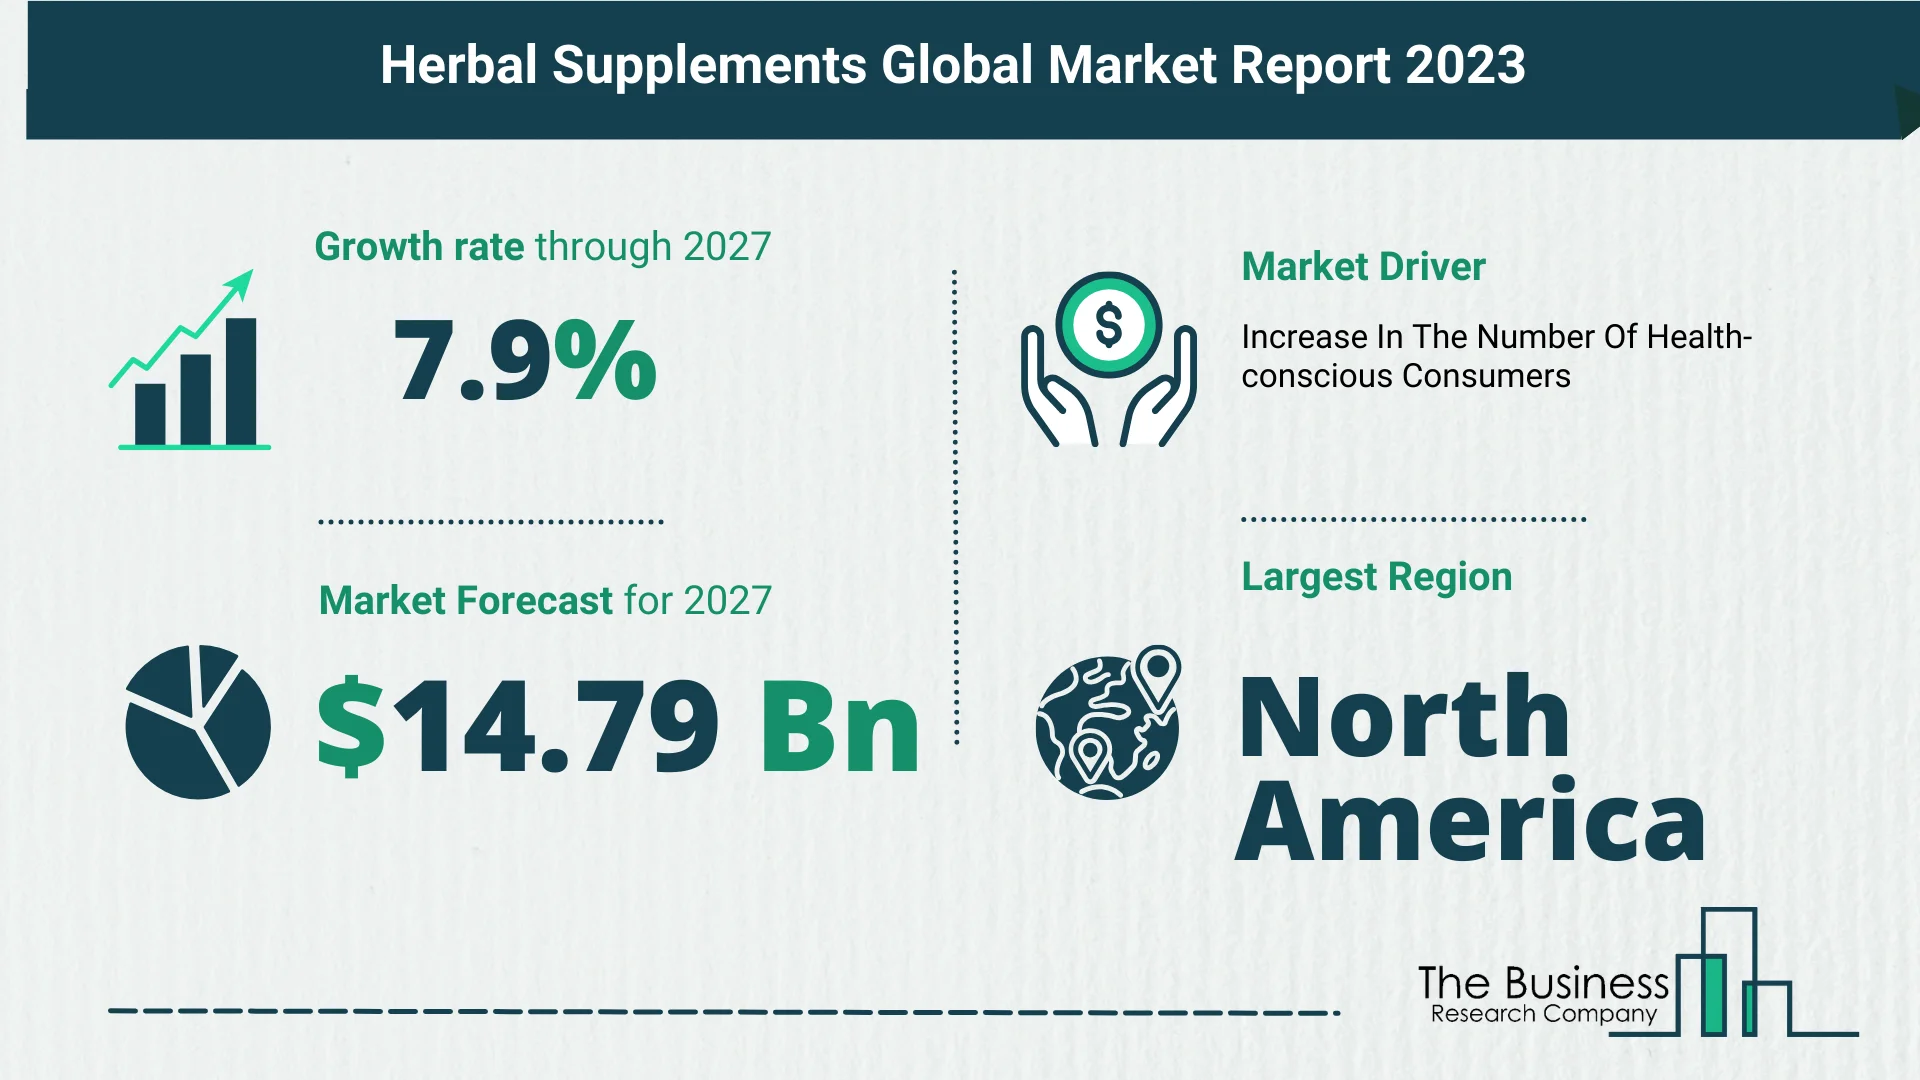 Global Herbal Supplements Market Analysis: Estimated Market Size And Growth Rate